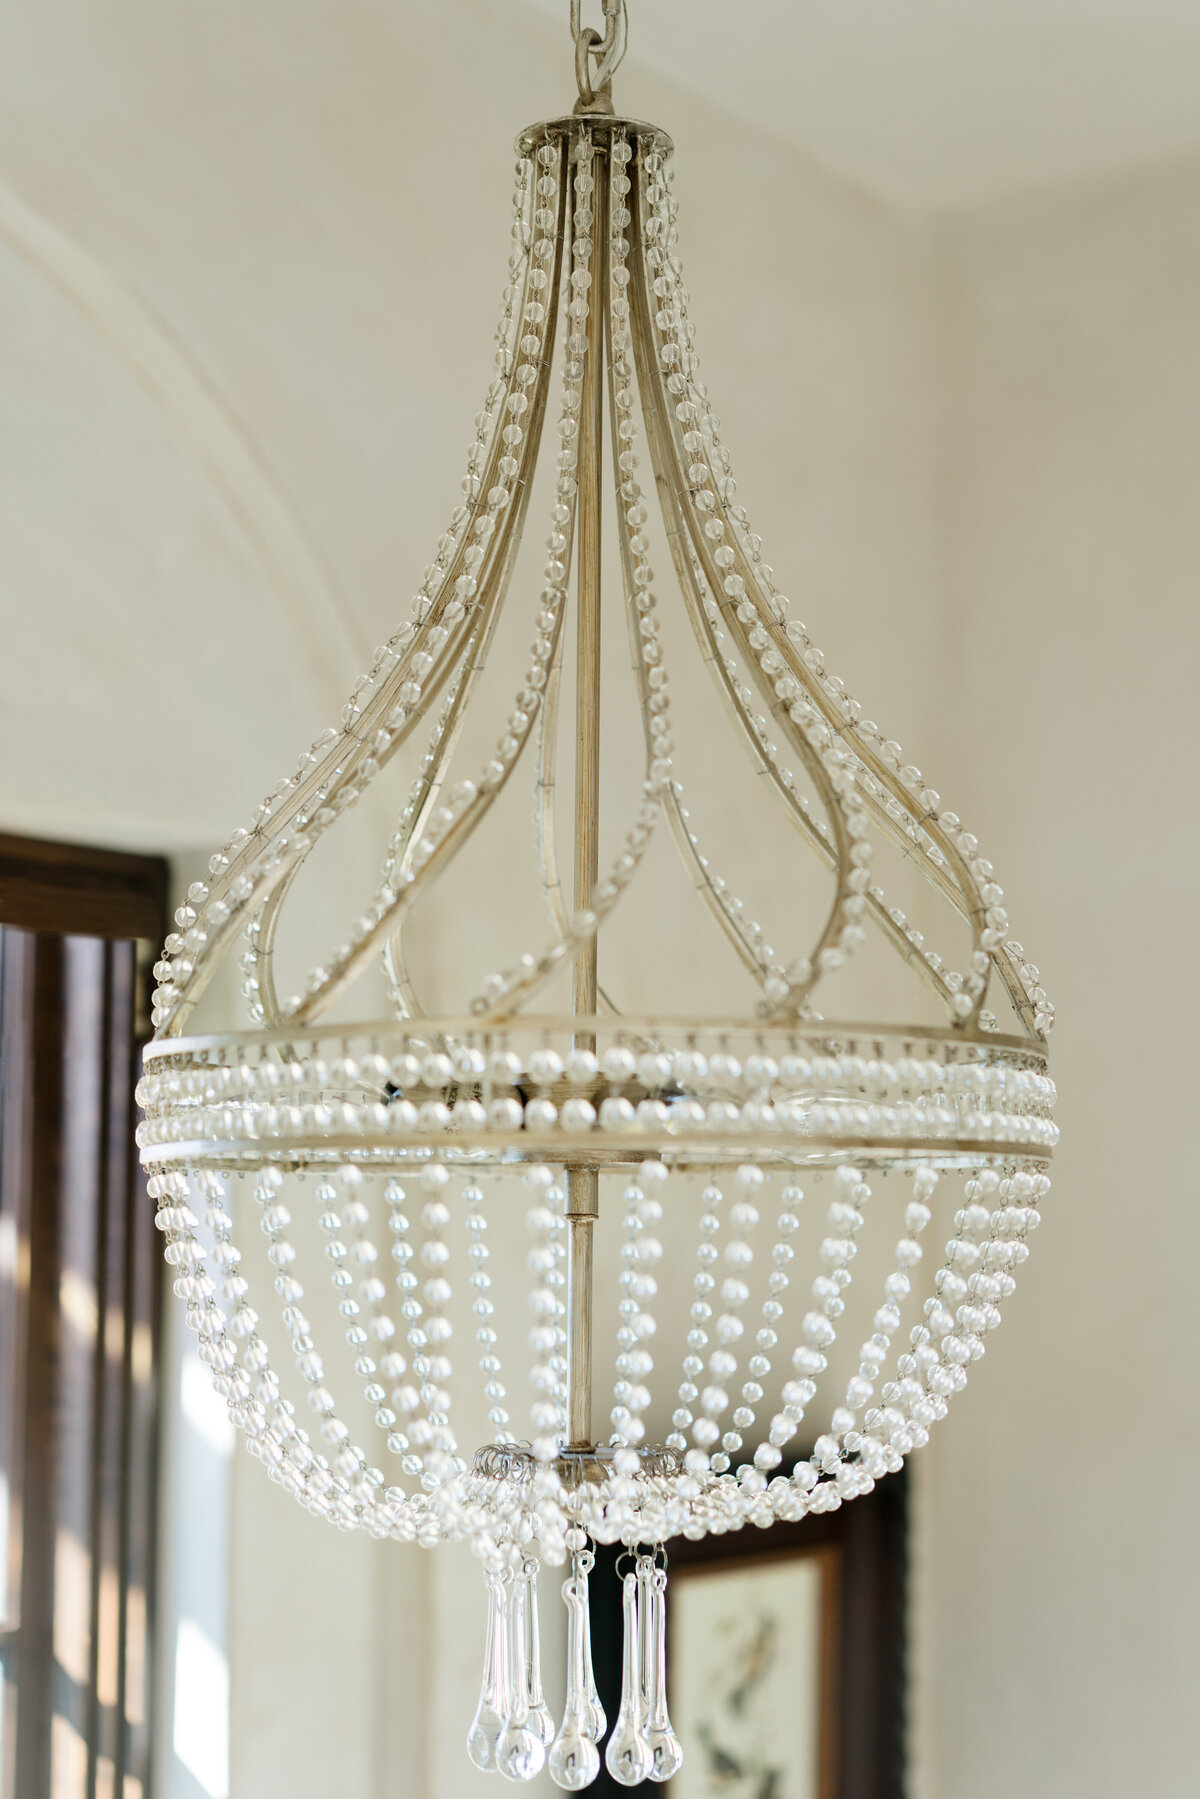 Panageries Residential Interior Design | Italian Country Villa Charming Master Bathroom Chandelier